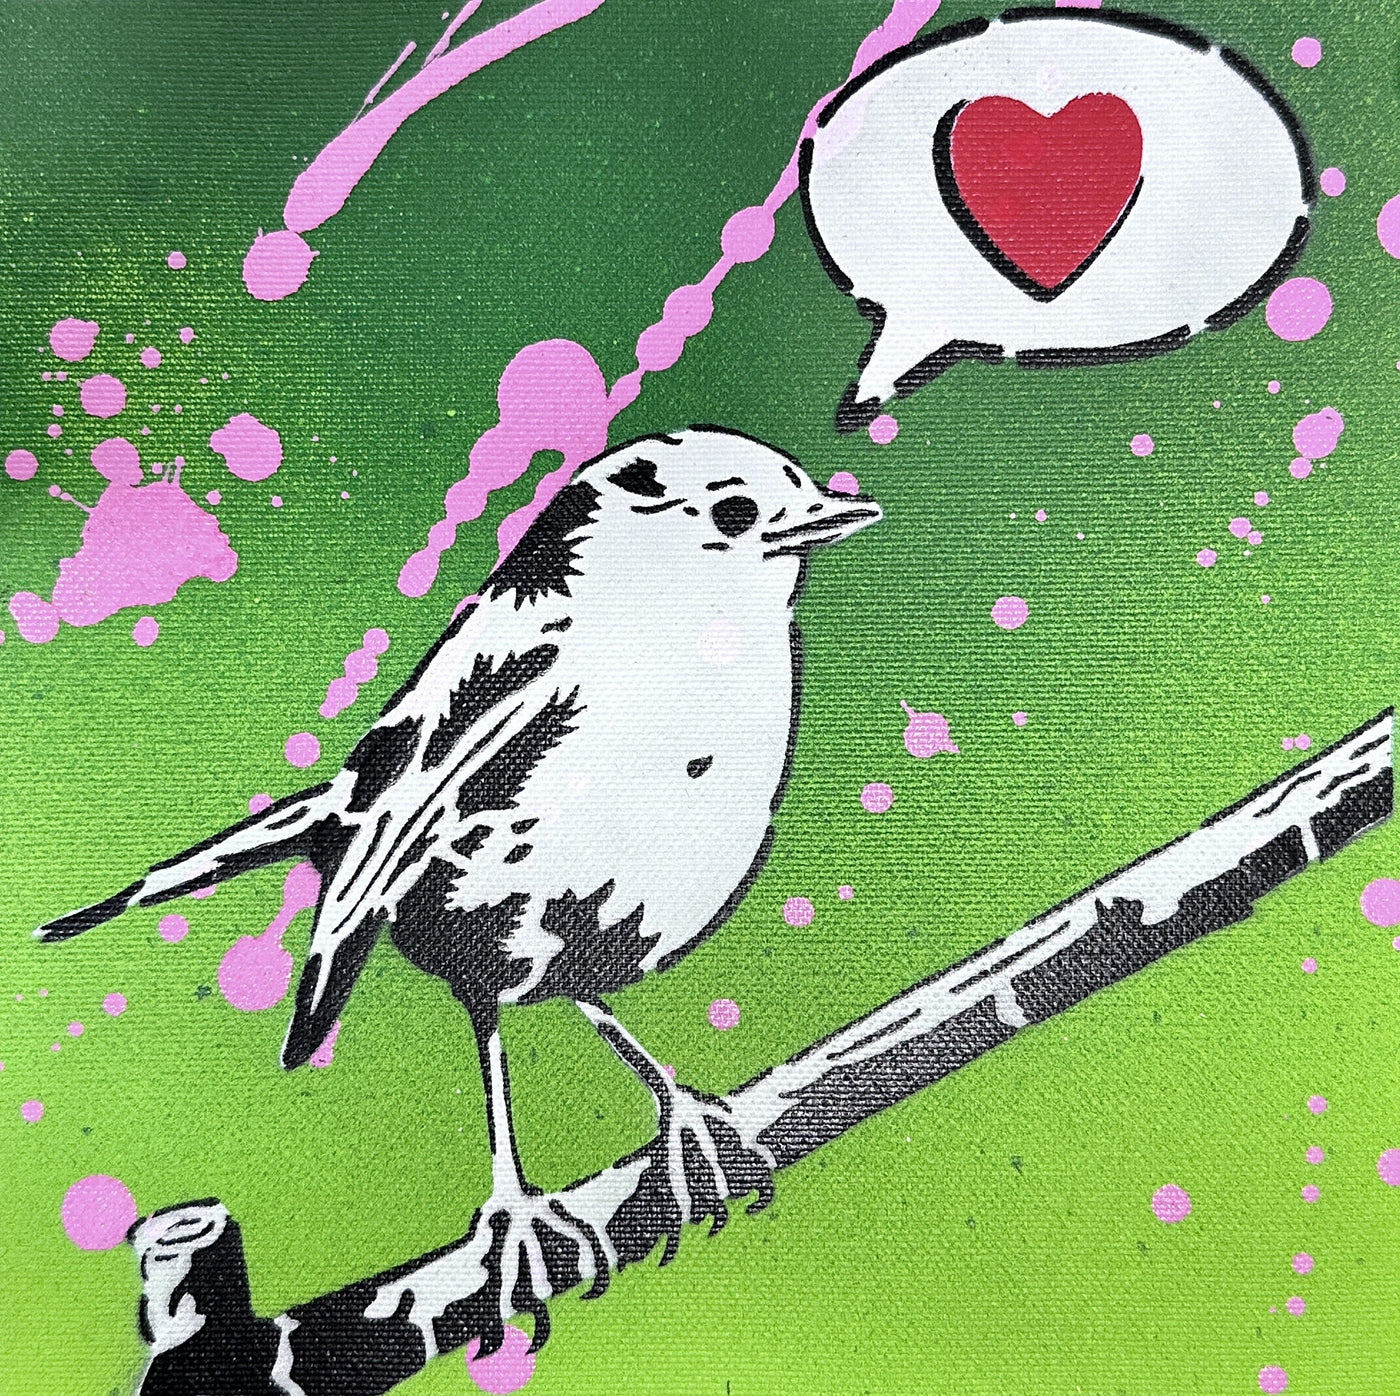 Mr. Savethewall - Free as a Bird - Unique work on canvas - 2023_Green Pink